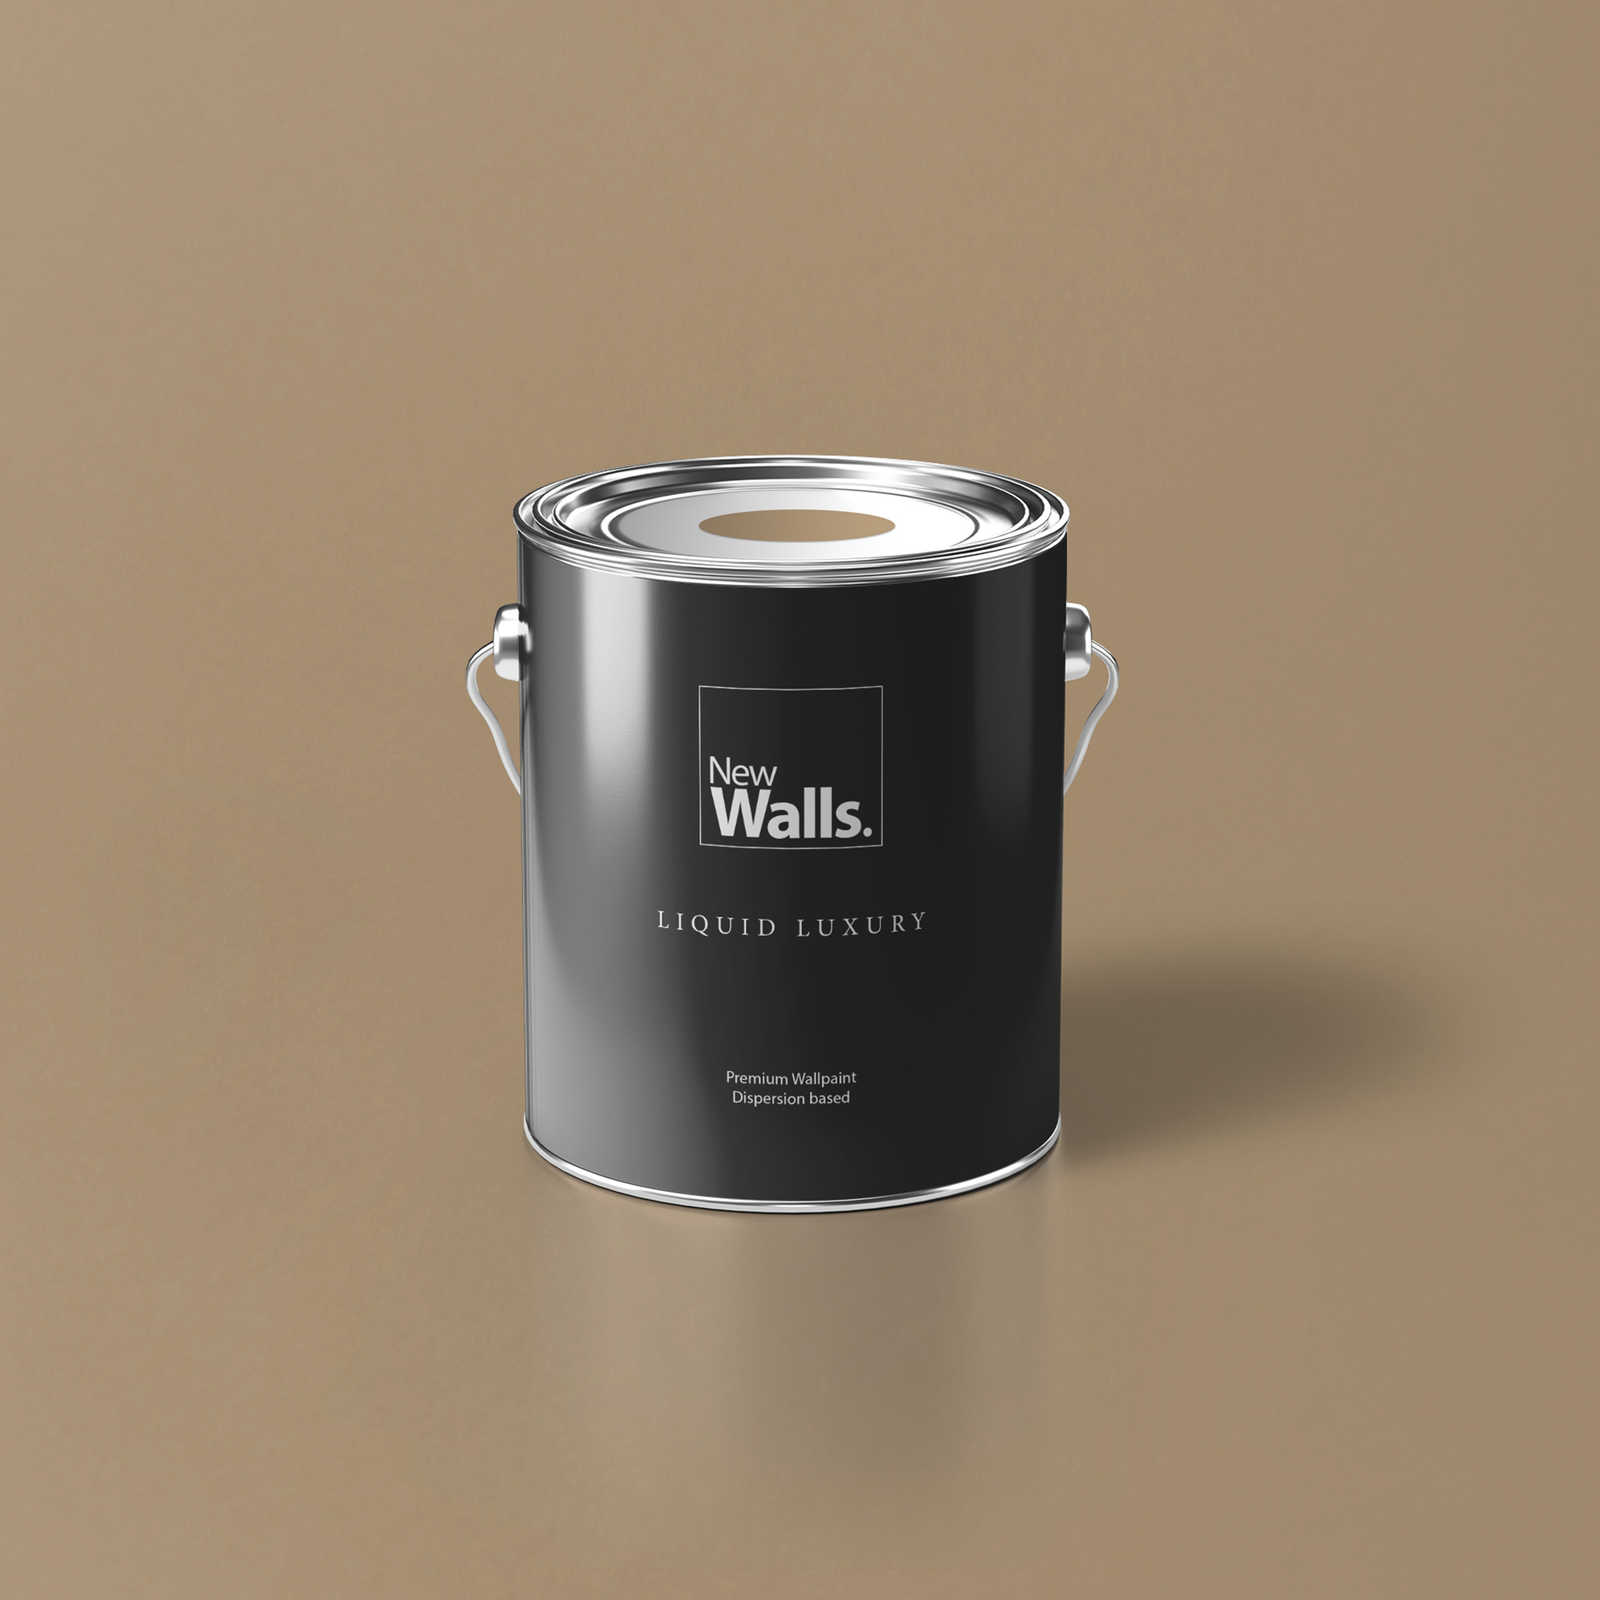 Premium Wall Paint Nature Cappuccino »Essential Earth« NW710 – 2.5 litre
